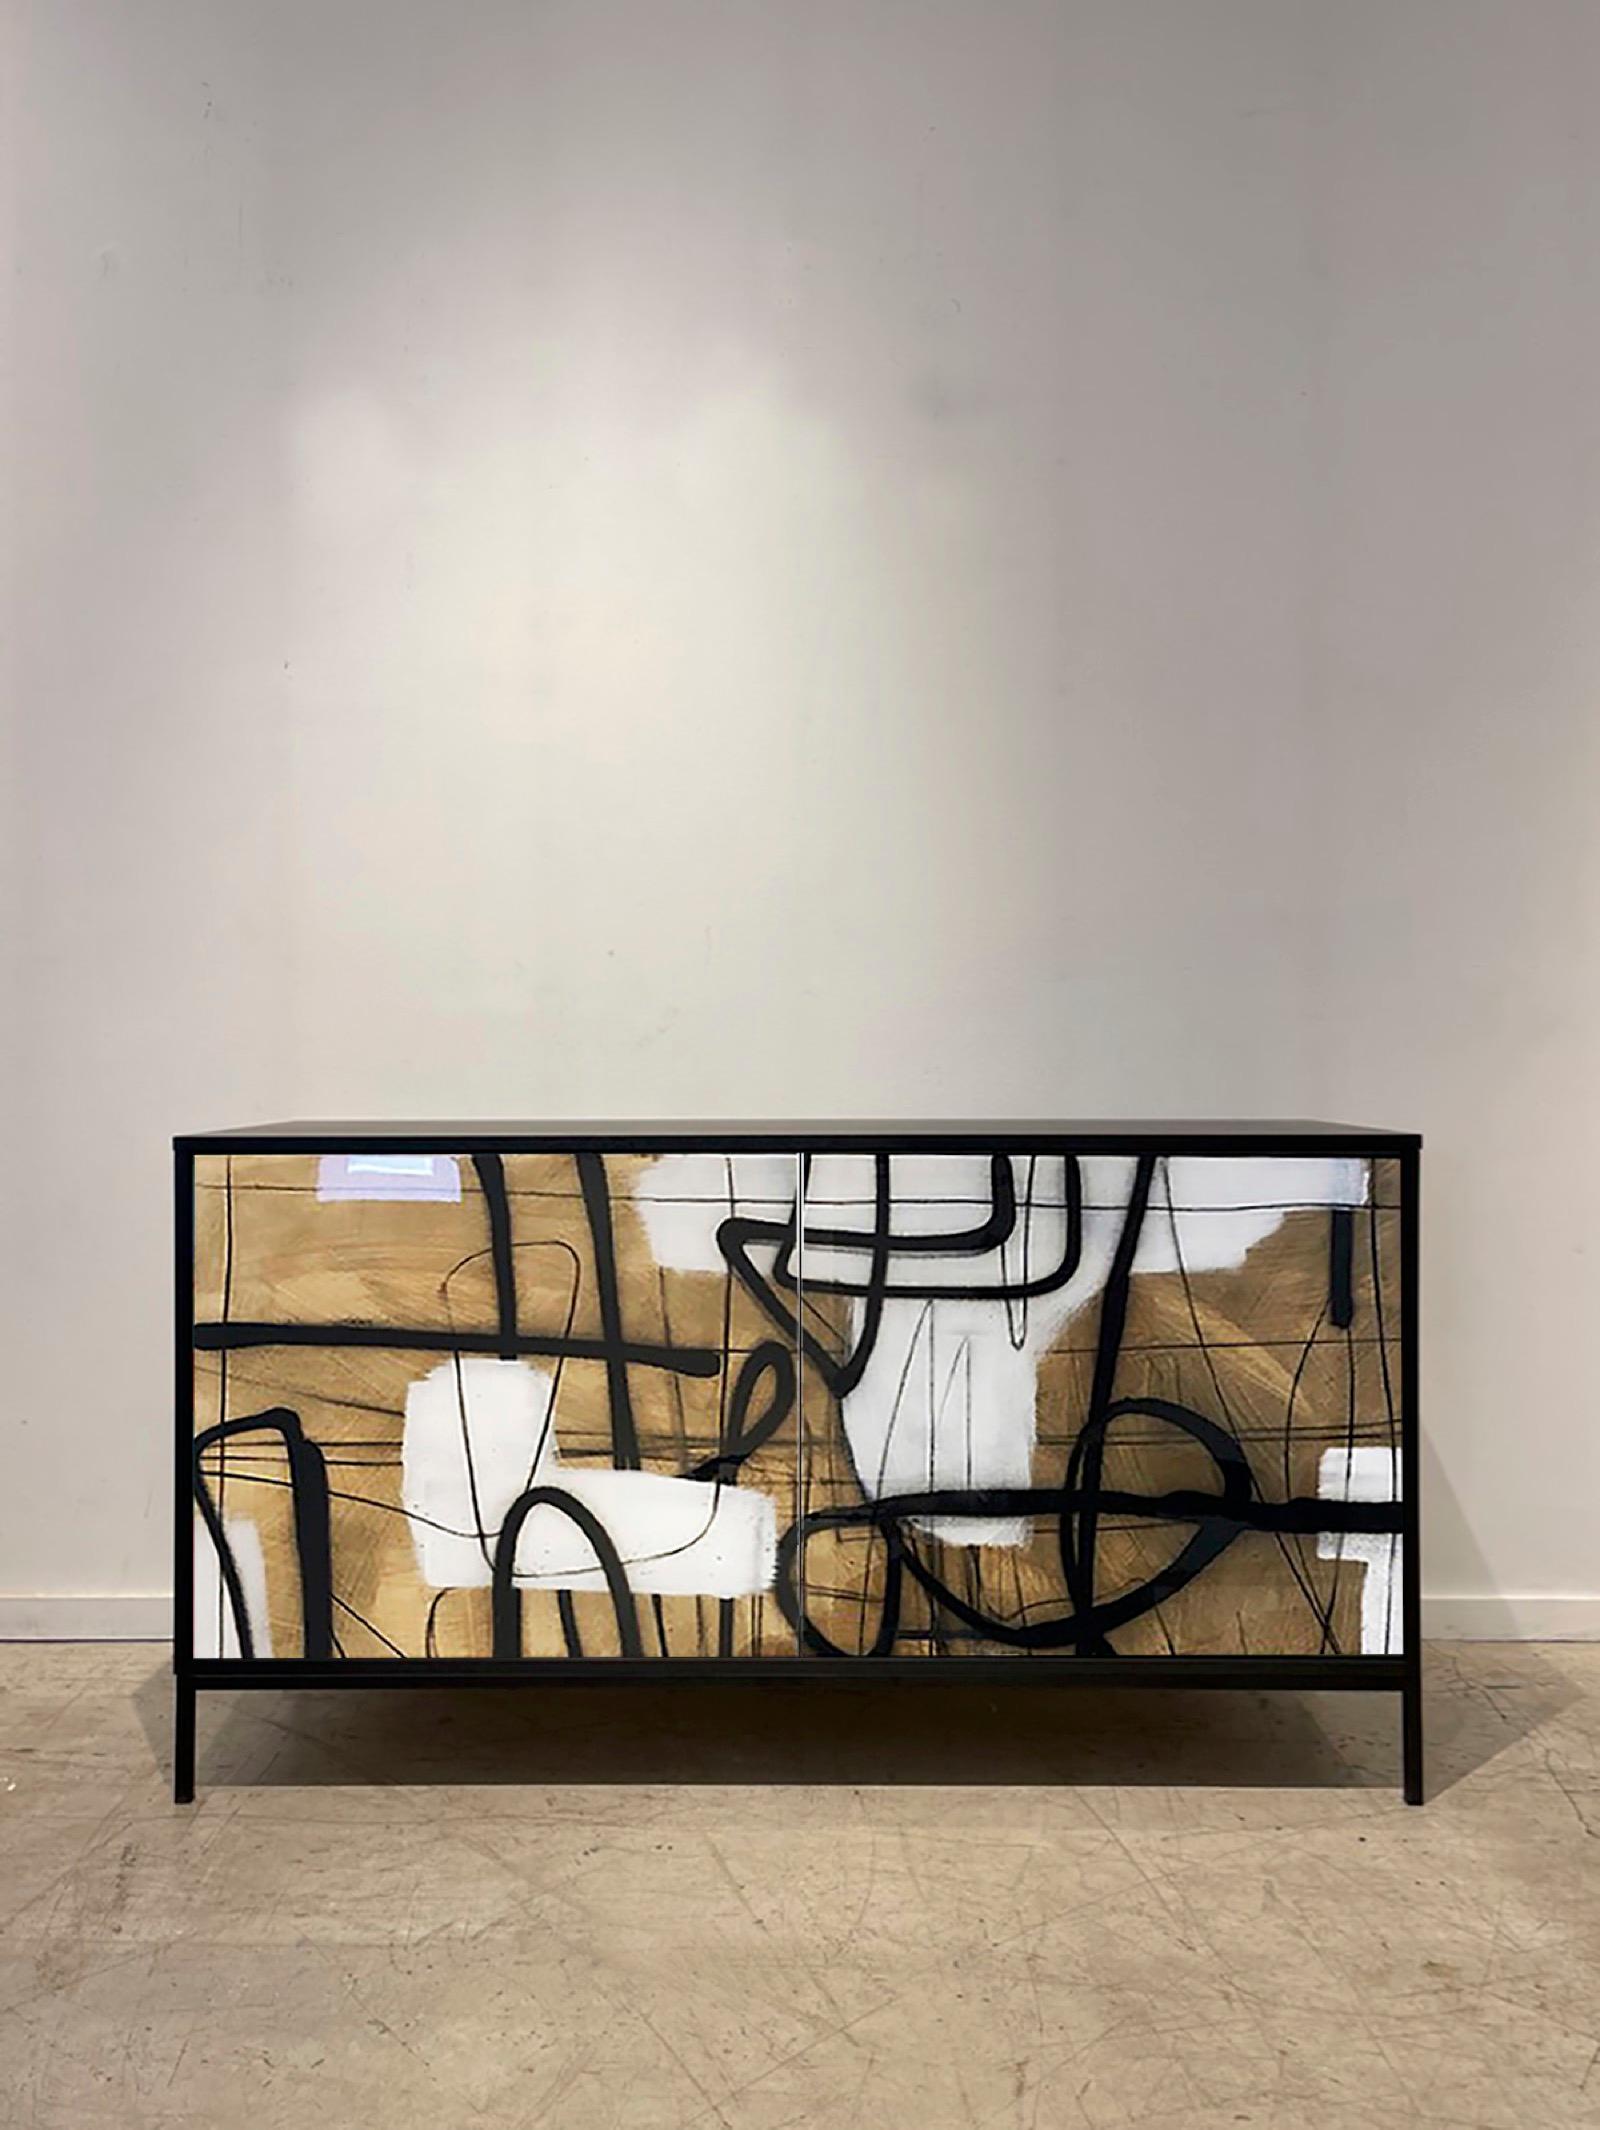 The Enamel Abstract cabinet  is designed and finished in our Toronto studio, Morgan Clayhall. 

Drawing from the over twenty years of design backgrounds, the studio creates exquisitely crafted custom furniture.  The artwork is created by artist,